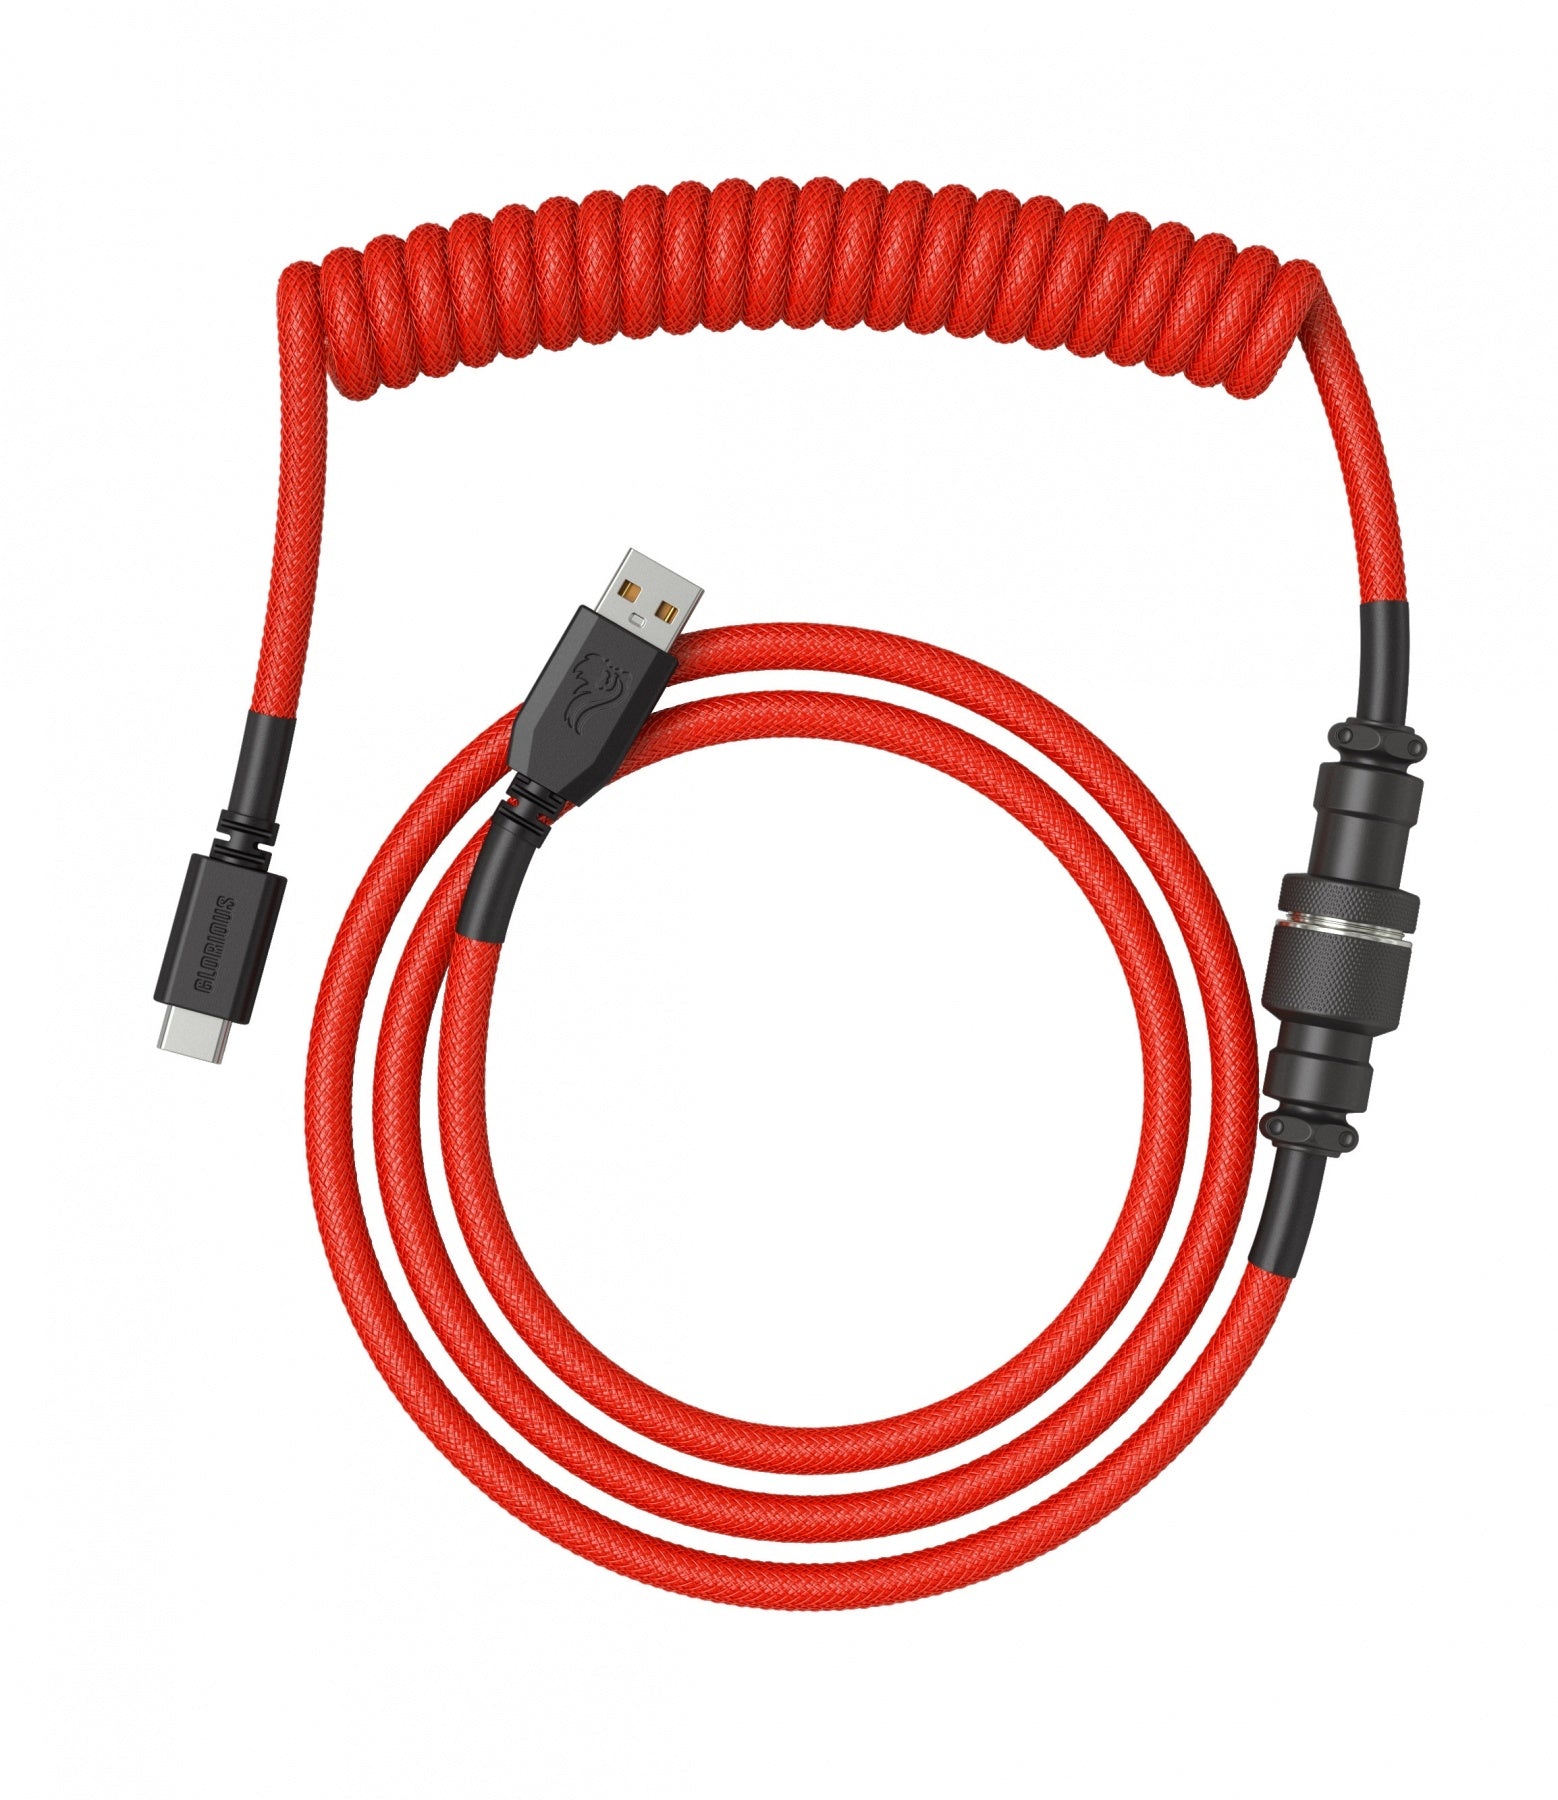 Glorious PC Coiled Keyboard Cable Red MKRN816EN1 |0|